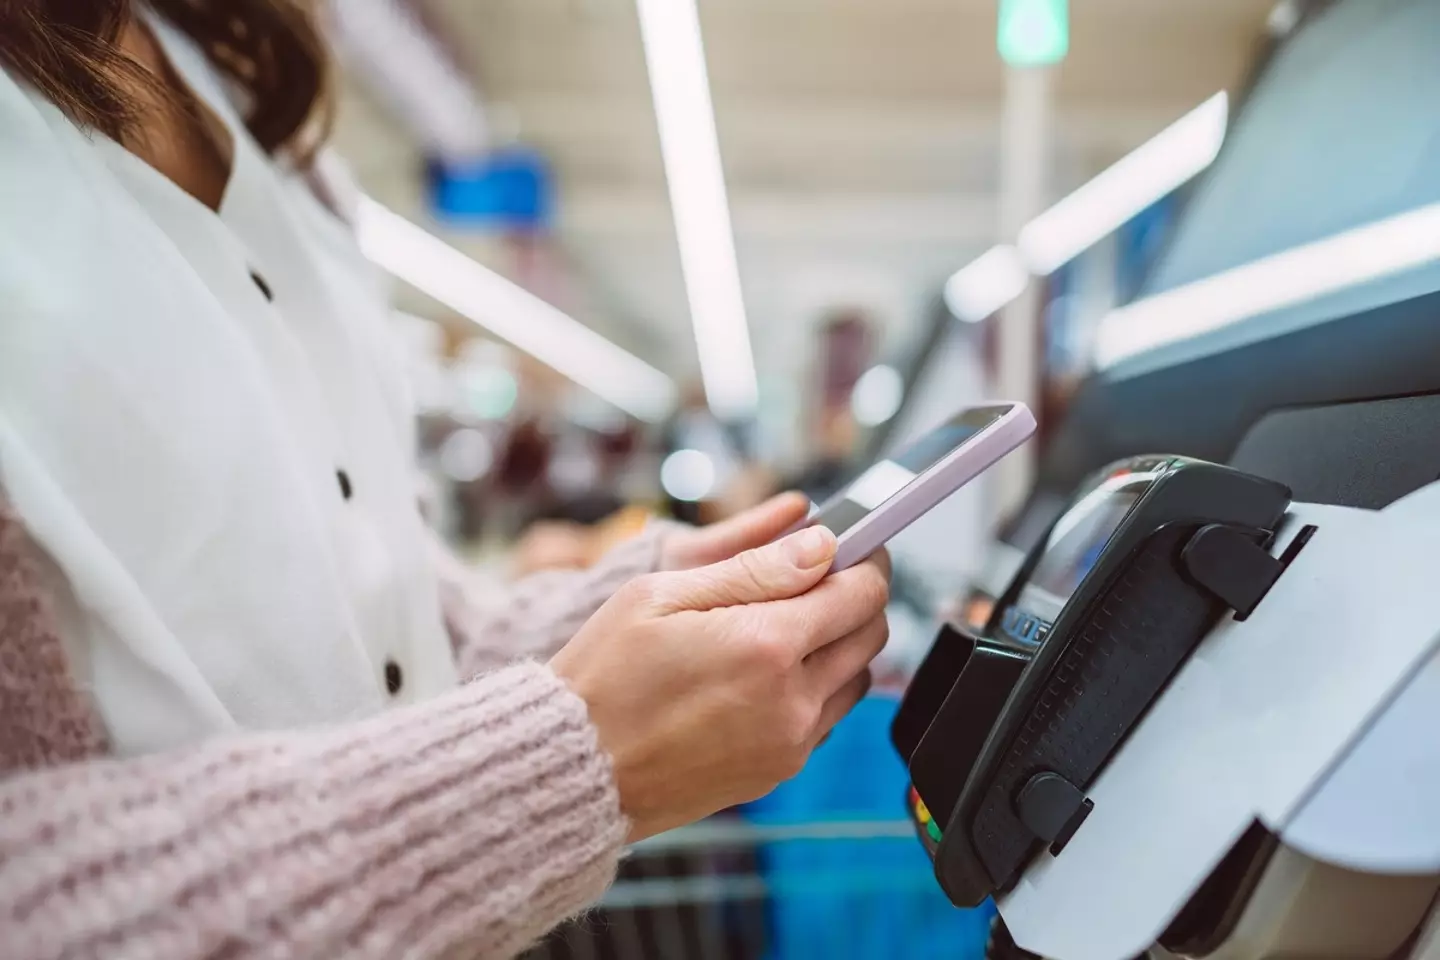 An Australian woman has been slammed for her self-checkout 'trick' which is against the law.